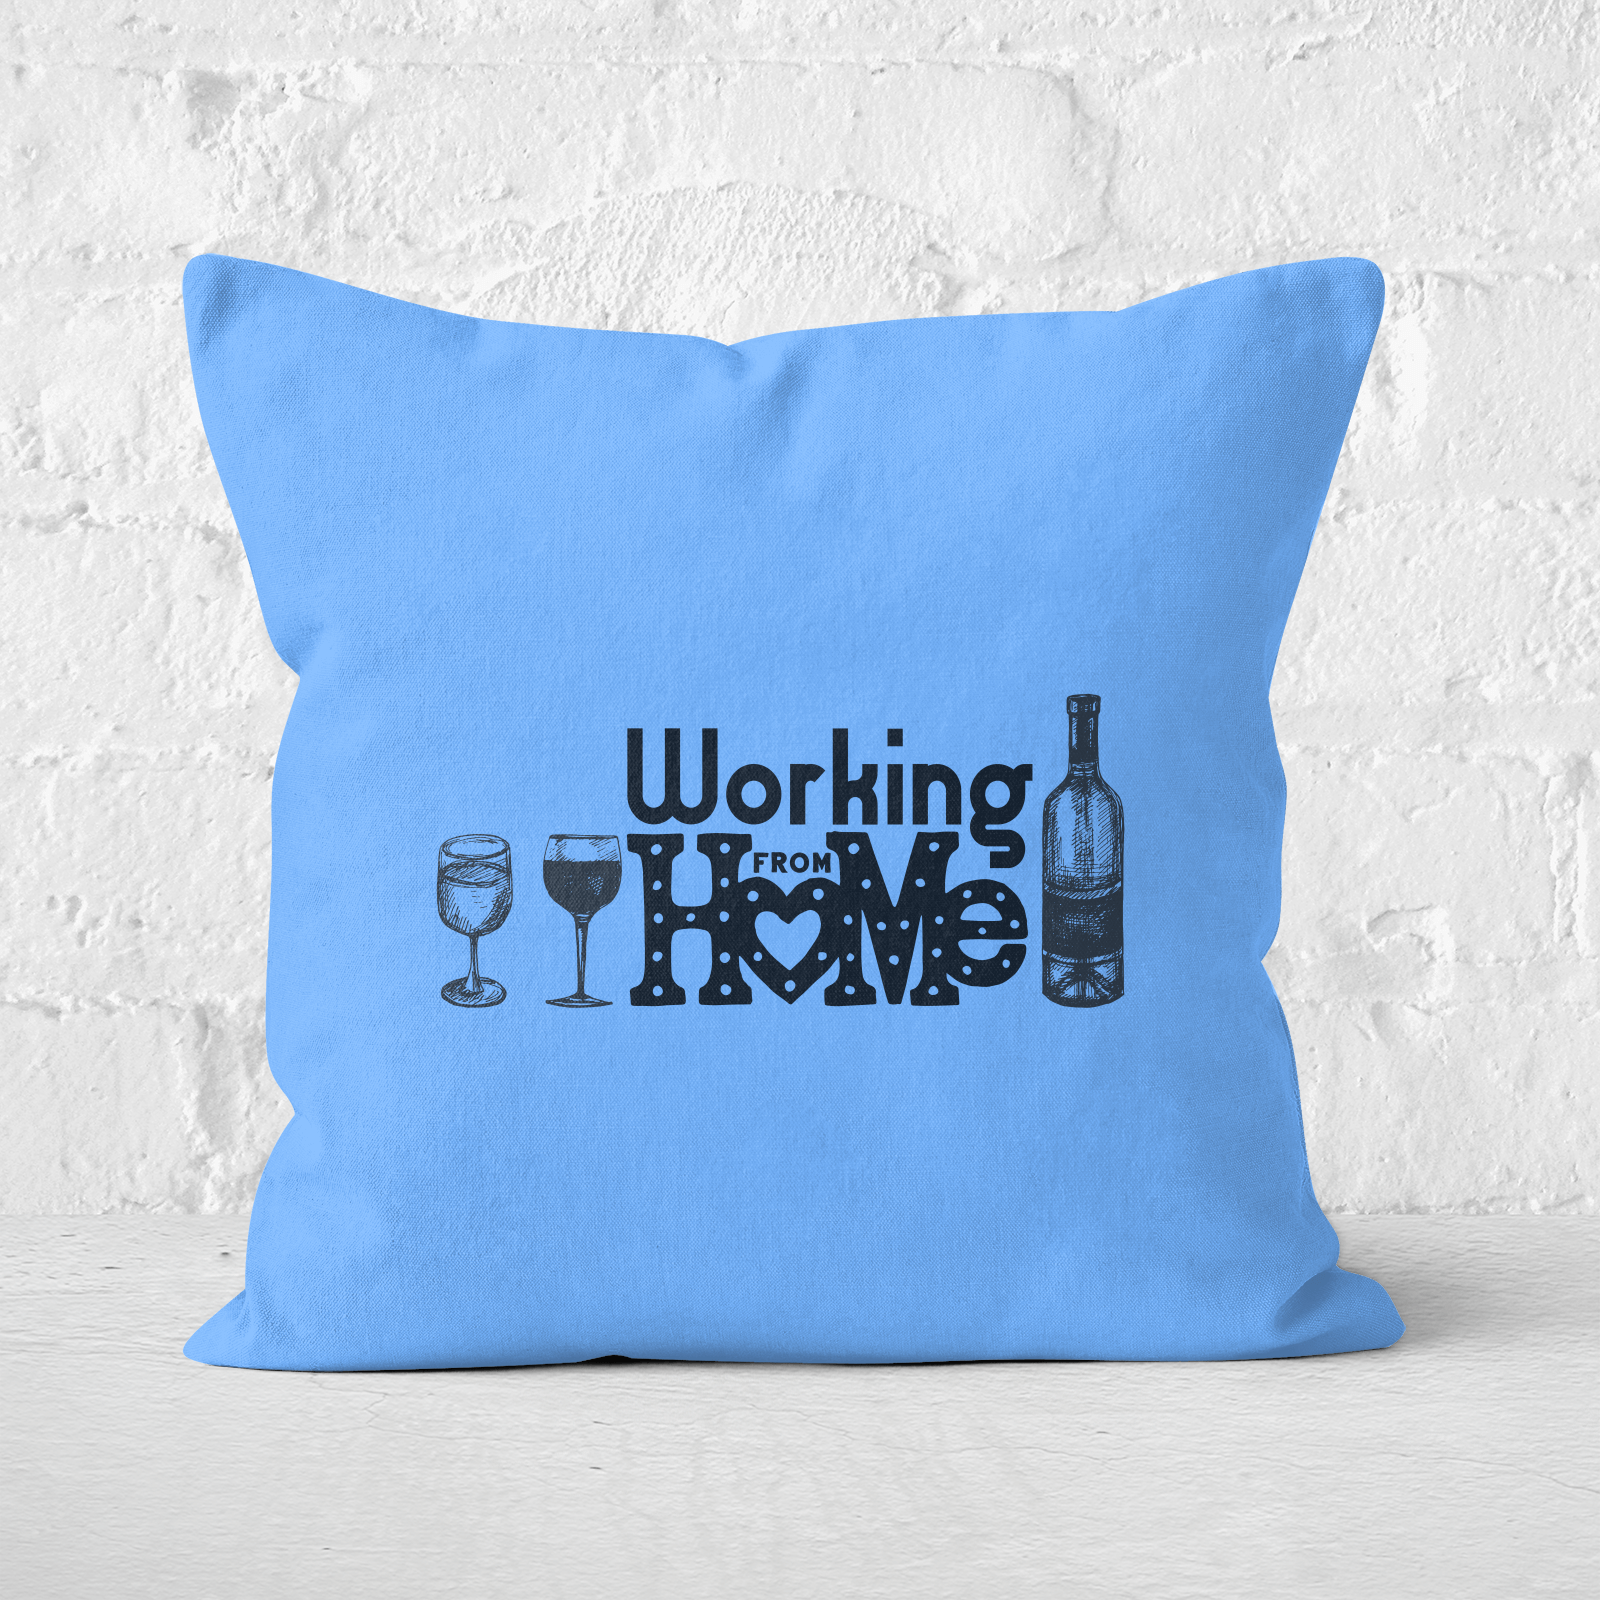 Working From Home Square Cushion - 60x60cm - Soft Touch